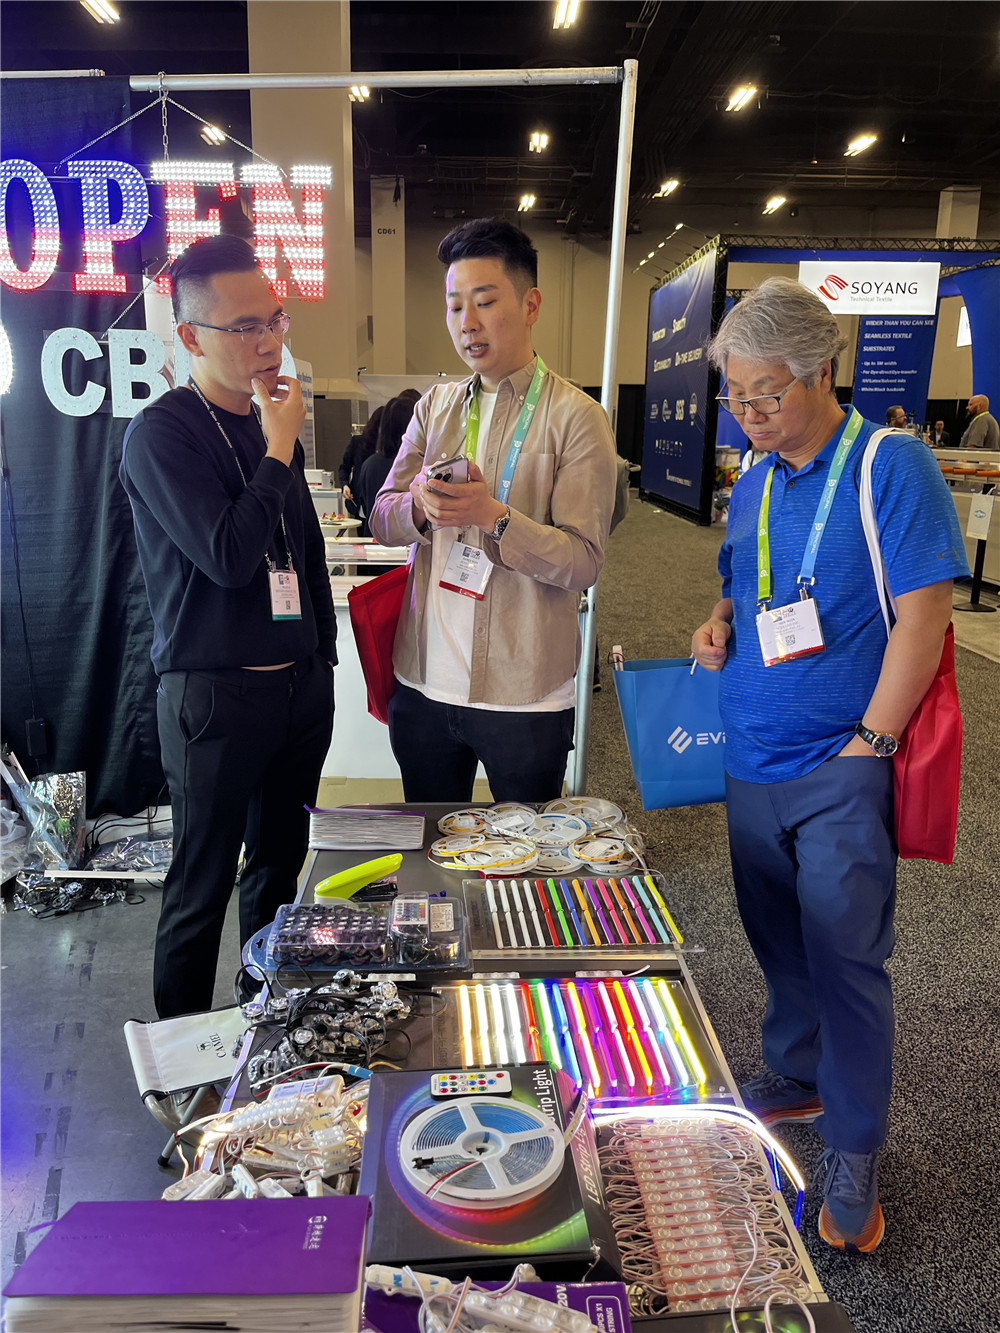 SIGN EXPO 2023 Review Our Signage Led Show Experience and Insights (3)qk4